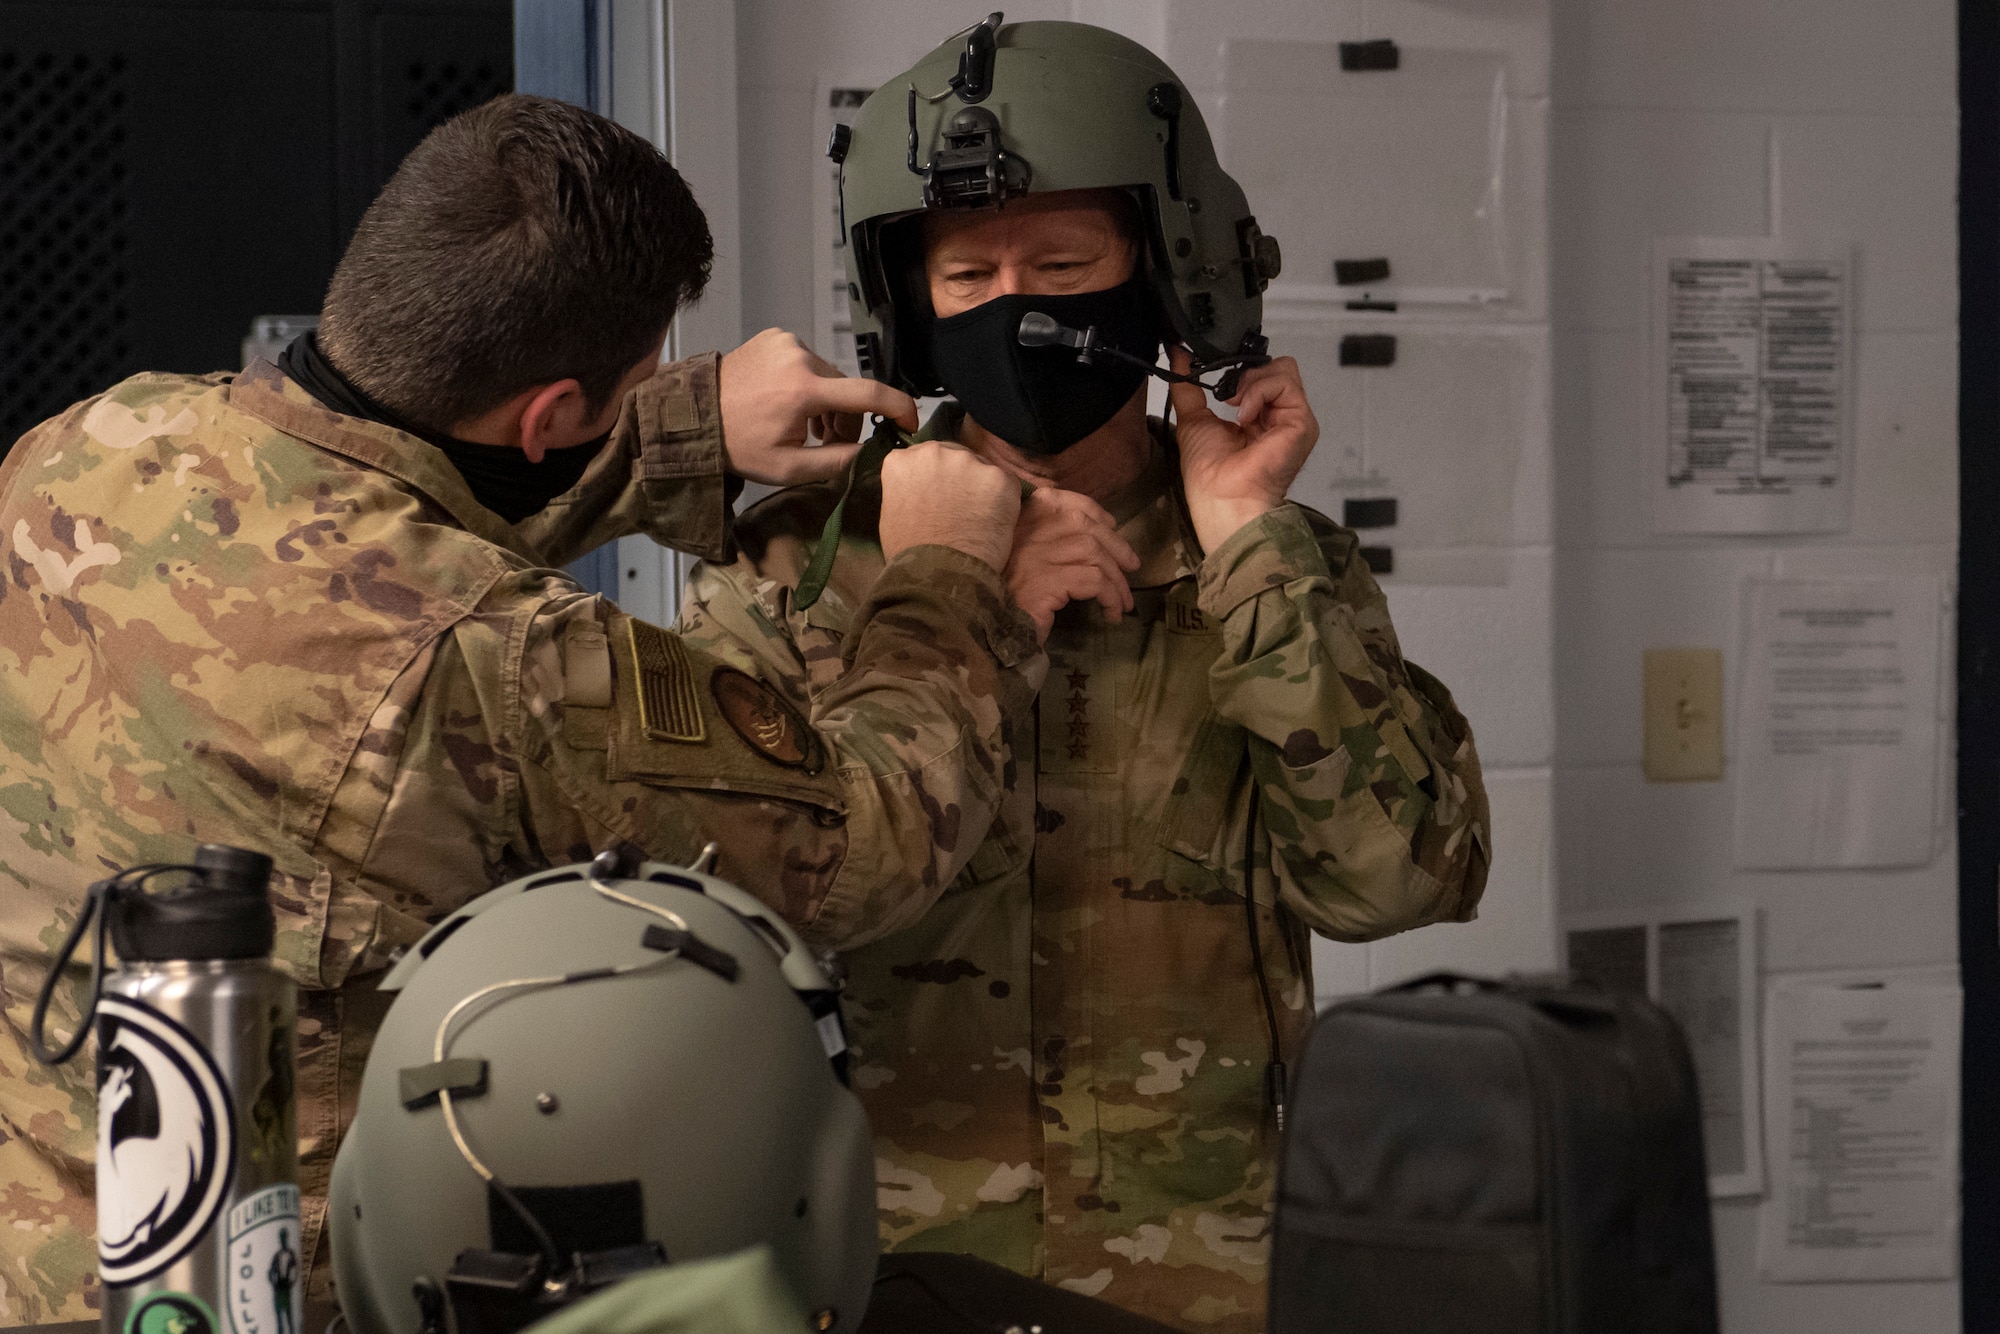 A photo of an Airman helping another Airman put a helmet on.